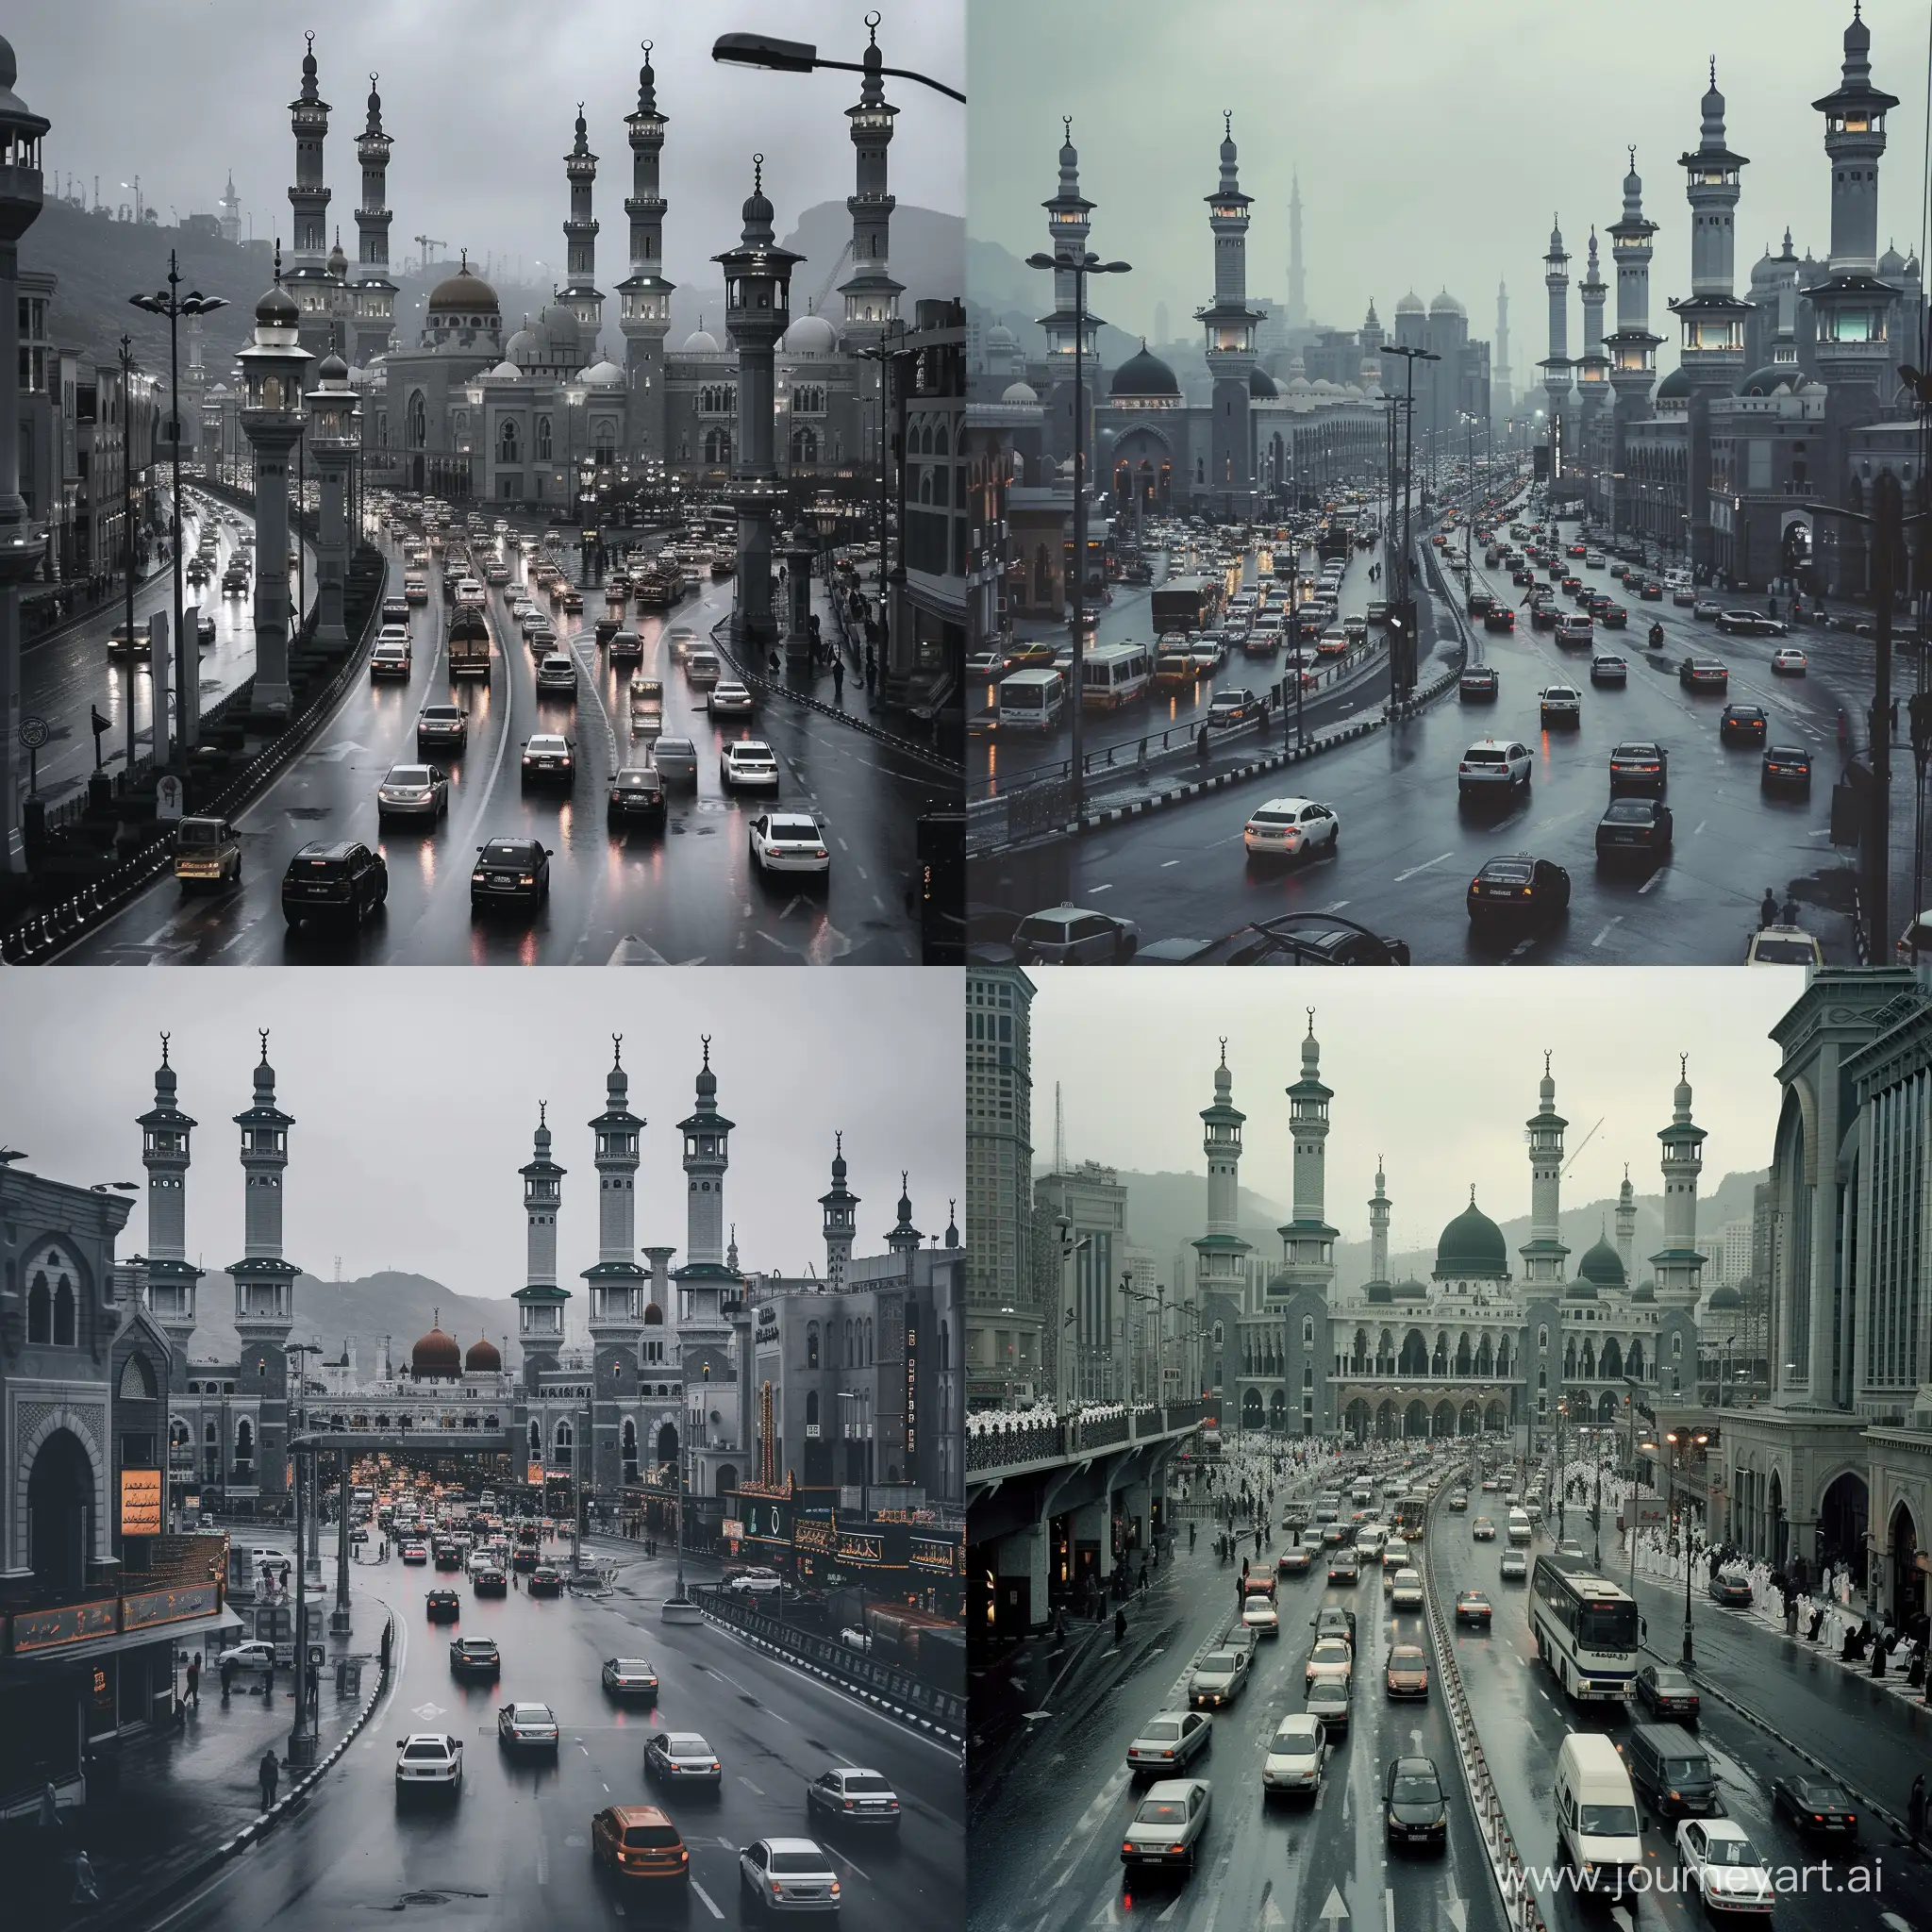 A traffic street intersection, Full of many Mecca grand mosque architectures with minarets, grey weather --v 6